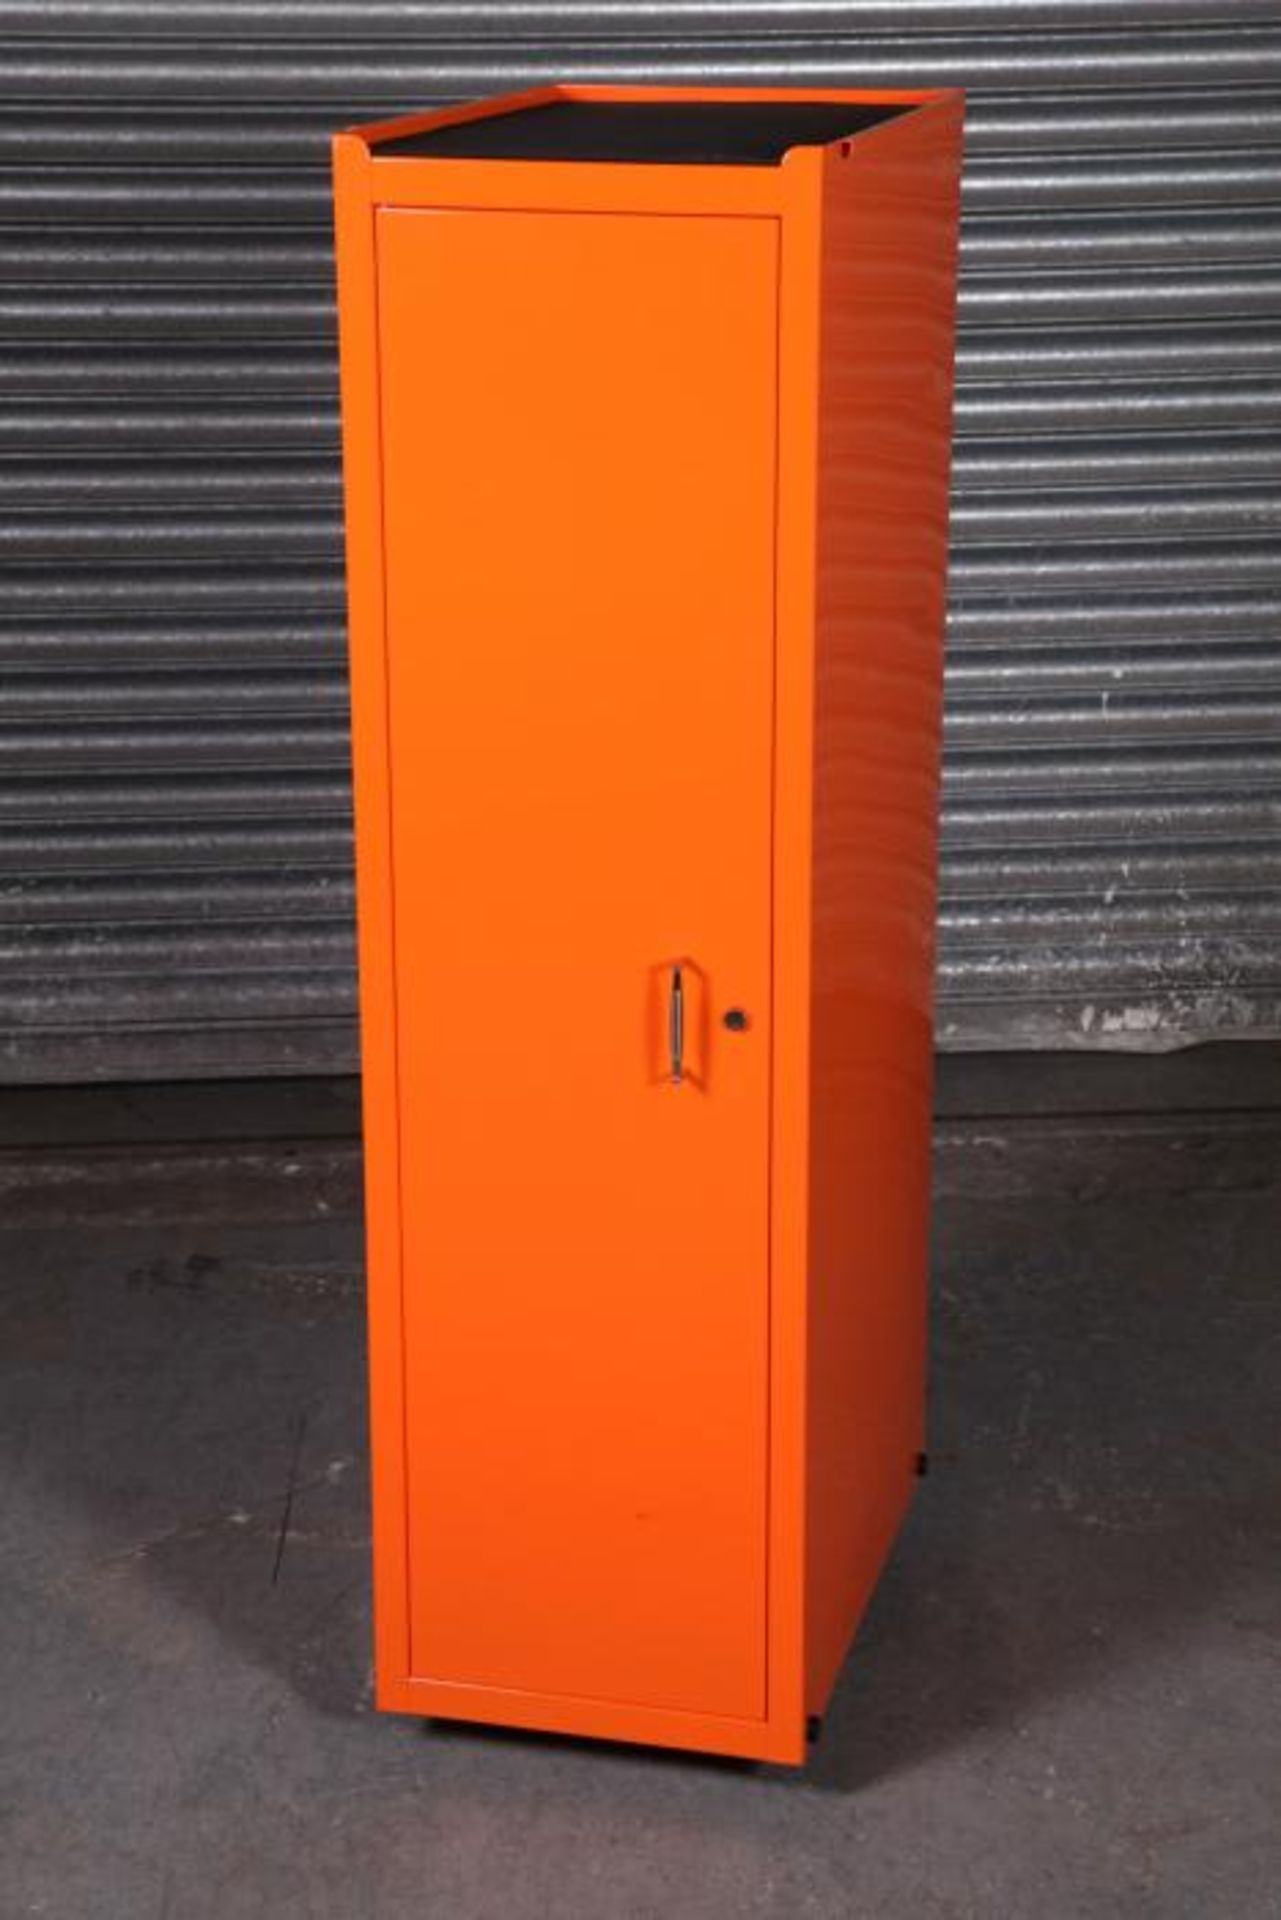 Orange side box 2pc 400mm w x 600mm d x 1360mm h with internal shelve and 3 draws delivery